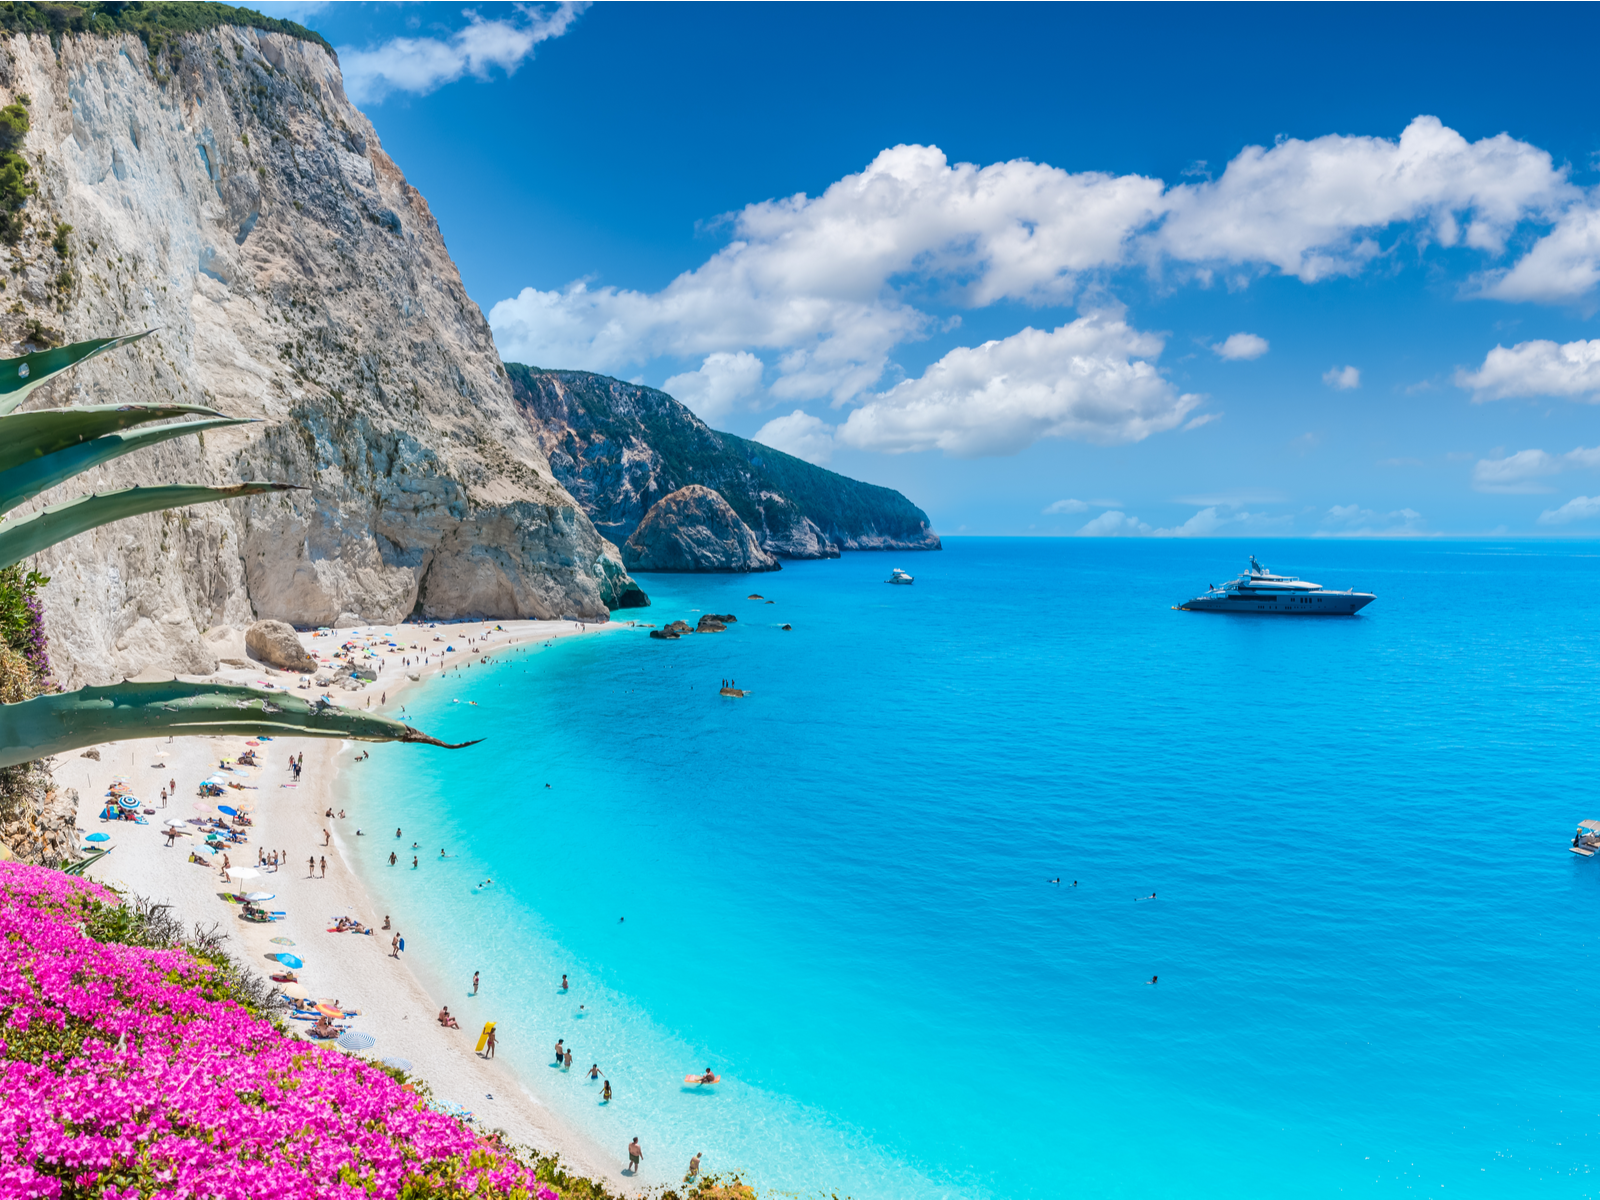 People enjoying the beautiful Porto Katsiki beach beside a tall cliff and cruise ship anchored offshore on Lefkada island, one of the best places to visit in Greece